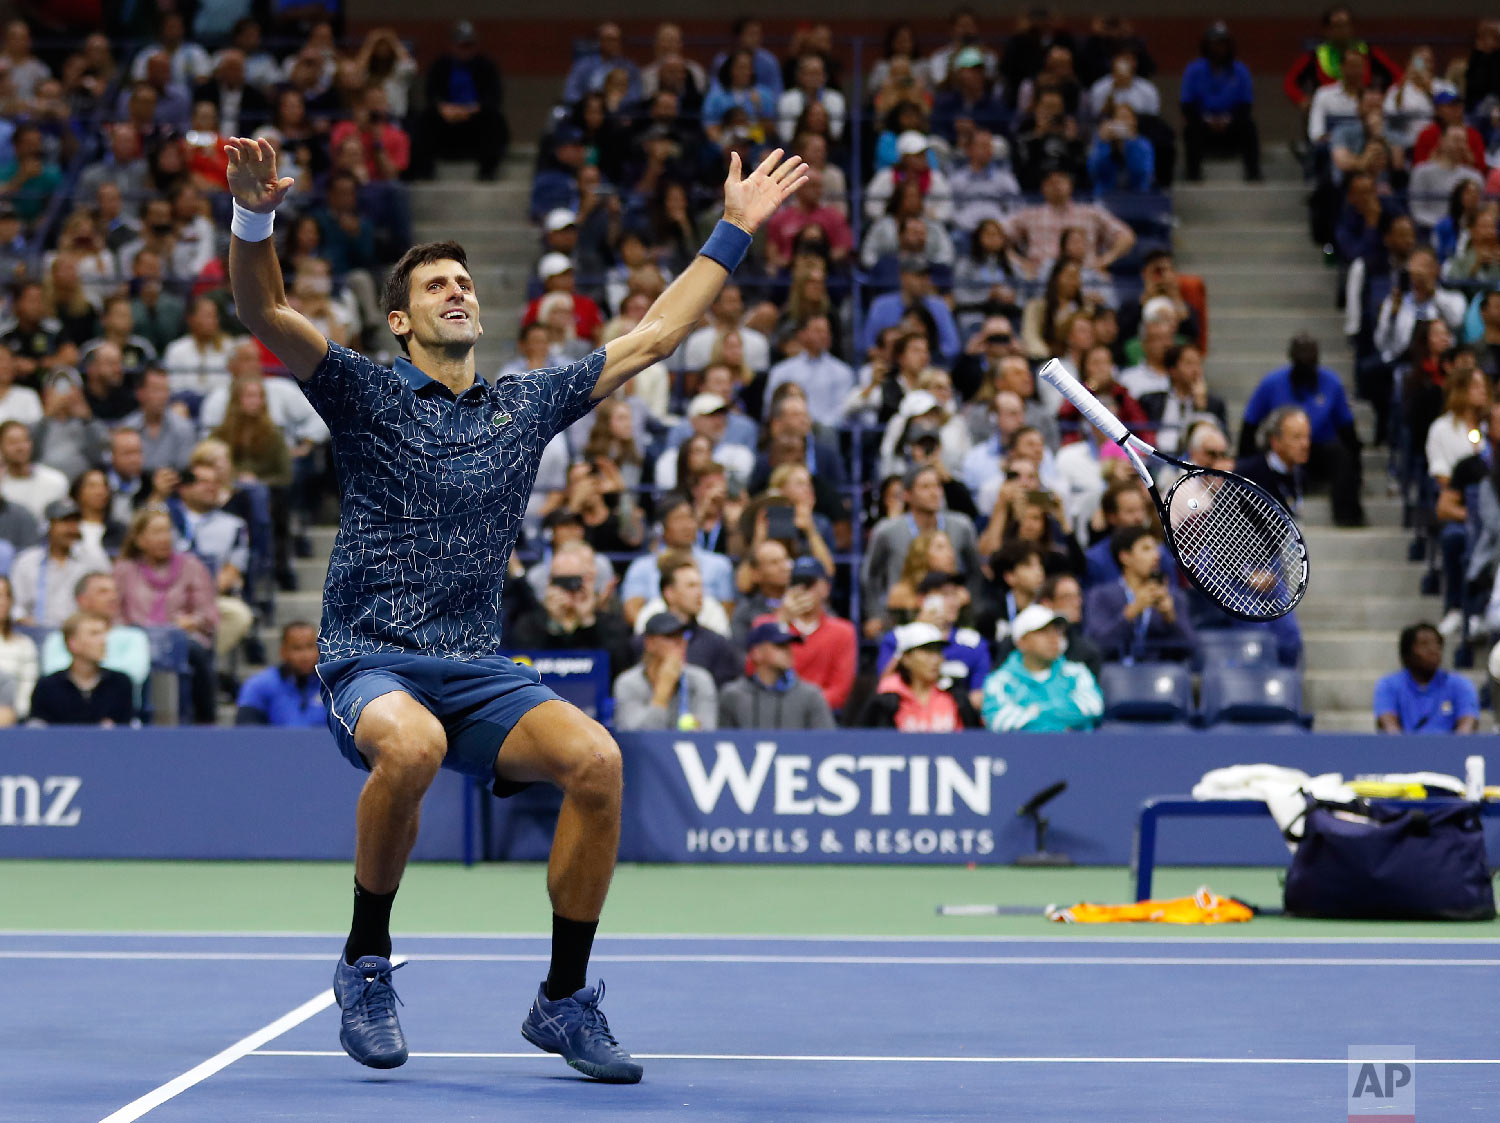  Novak Djokovic, of Serbia, celebrates after defeating Juan Martin del Potro, of Argentina, during the men's final of the U.S. Open tennis tournament on Sept. 9, 2018, in New York. (AP Photo/Adam Hunger) 